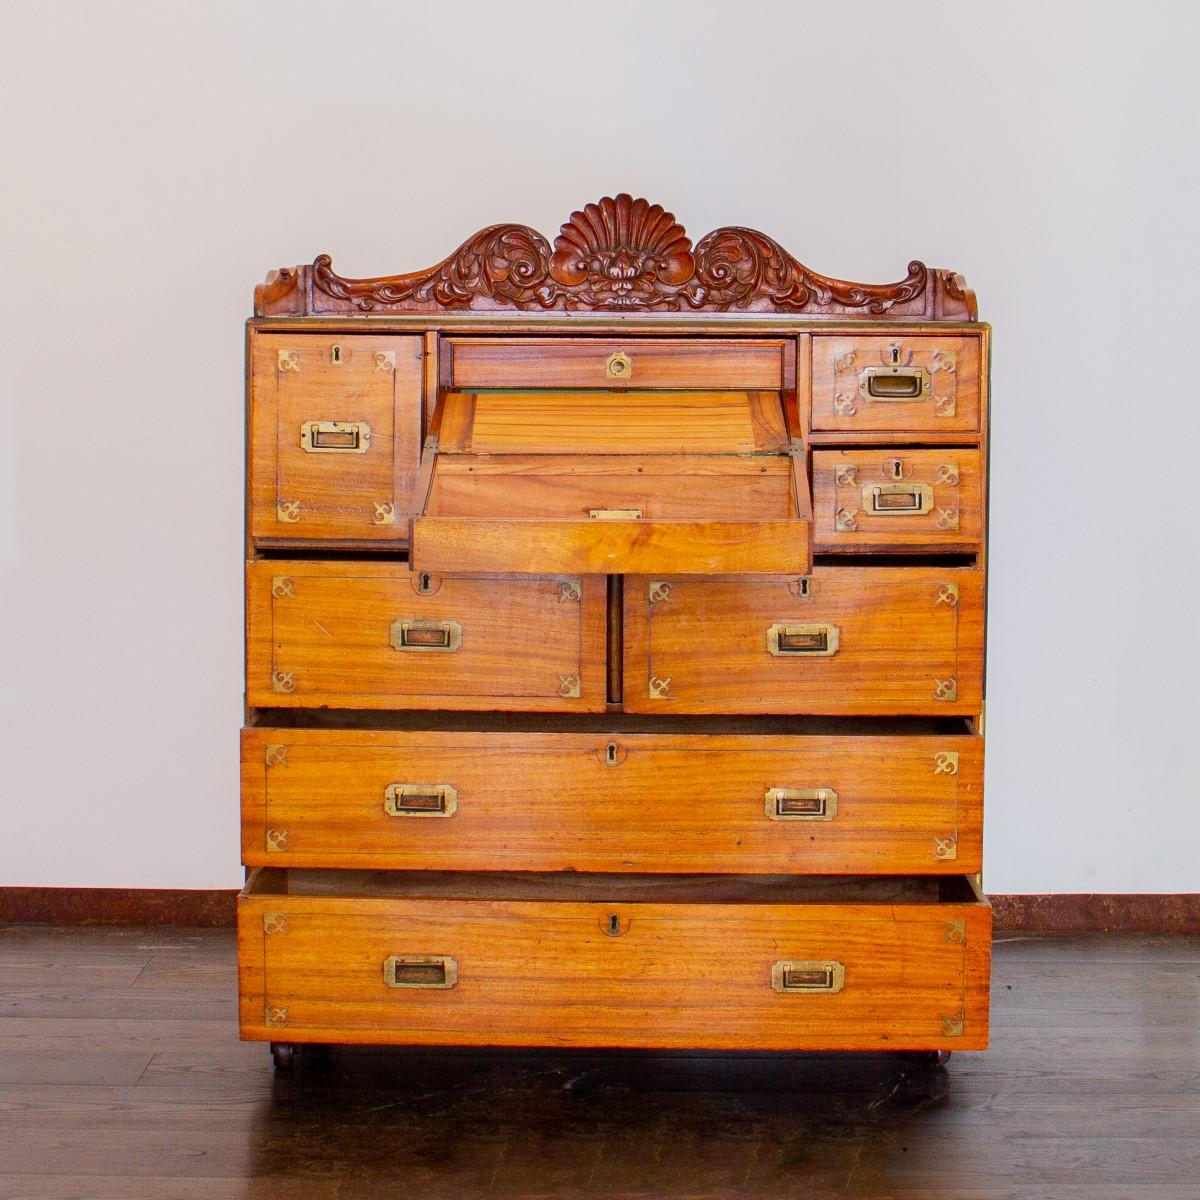 A late 19th century camphor wood campaign secretaire chest with decorative brass inlay bordering each drawer with fleur-de-lys style corners. The top section has a central drawer over two deep drawers and is flanked by one large drawer and two